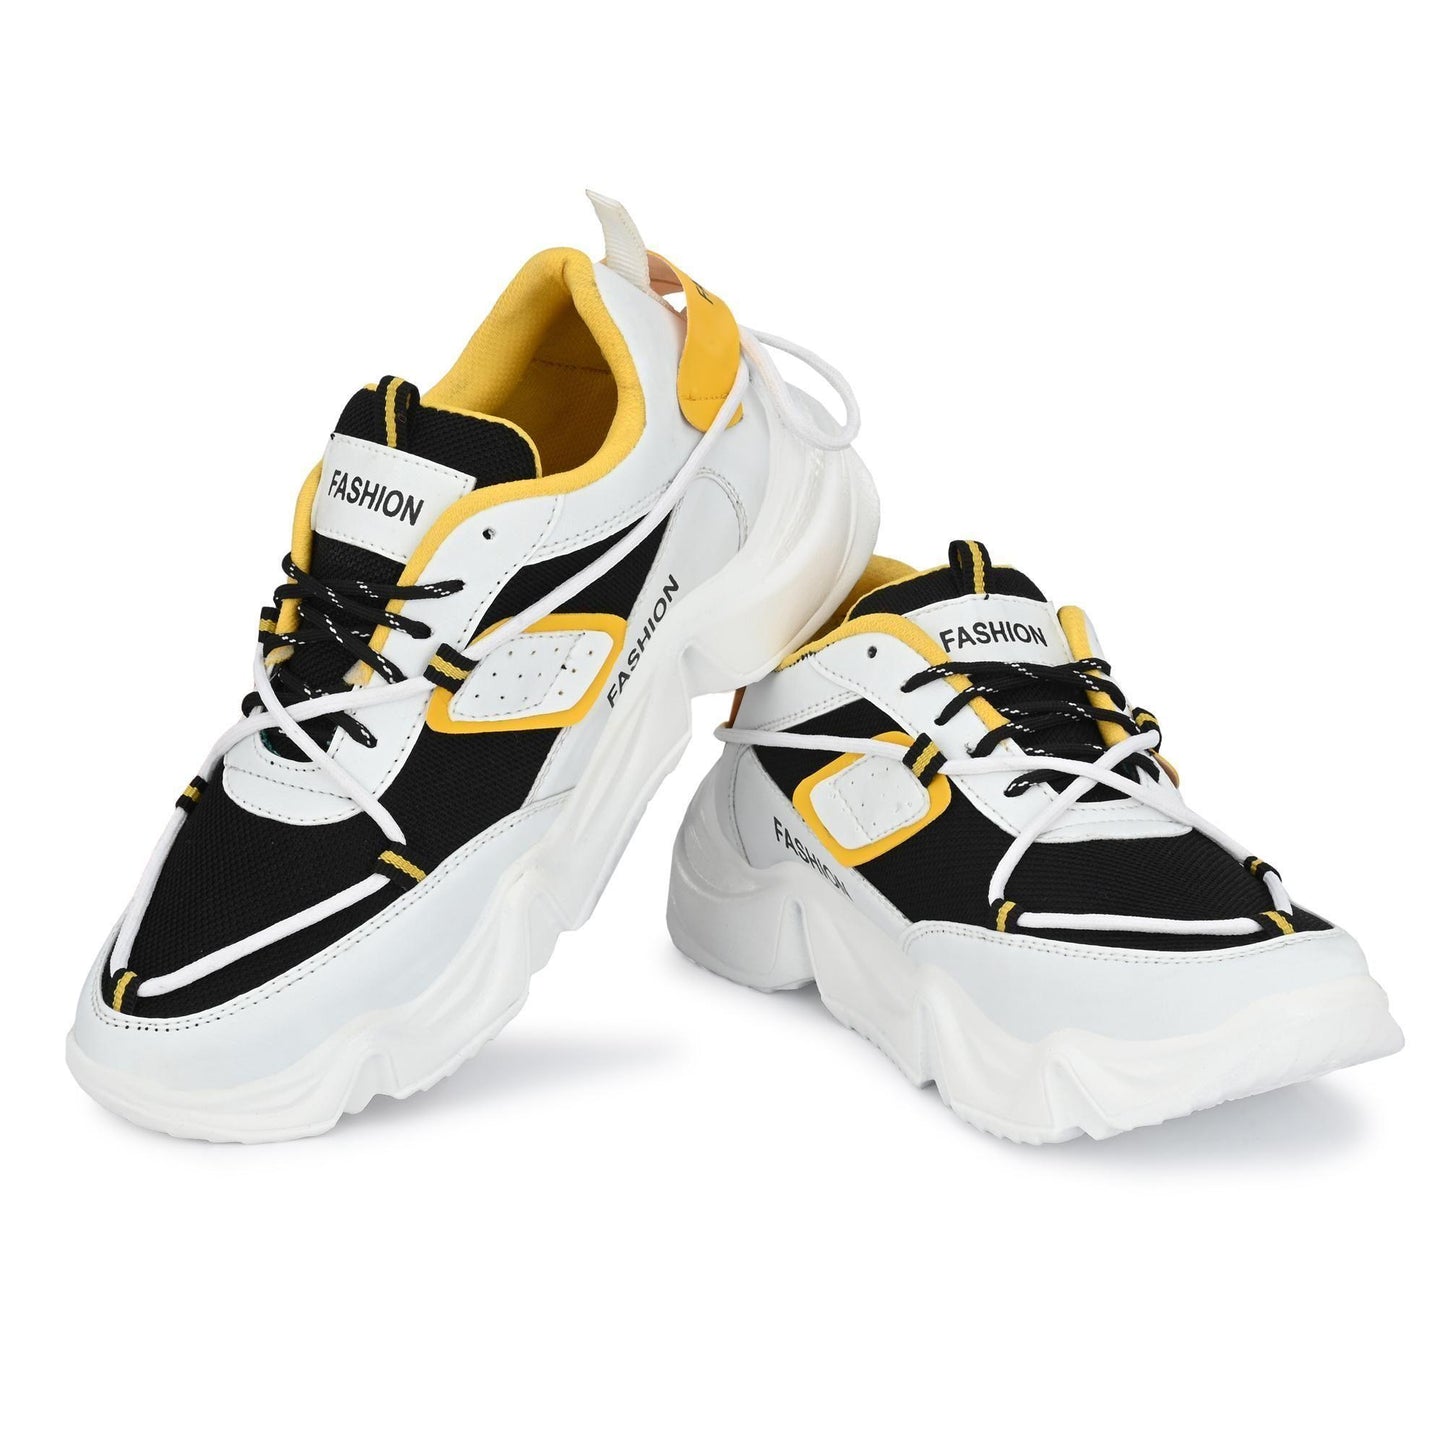 Light Weight Fashionable Sports Shoes - STORE